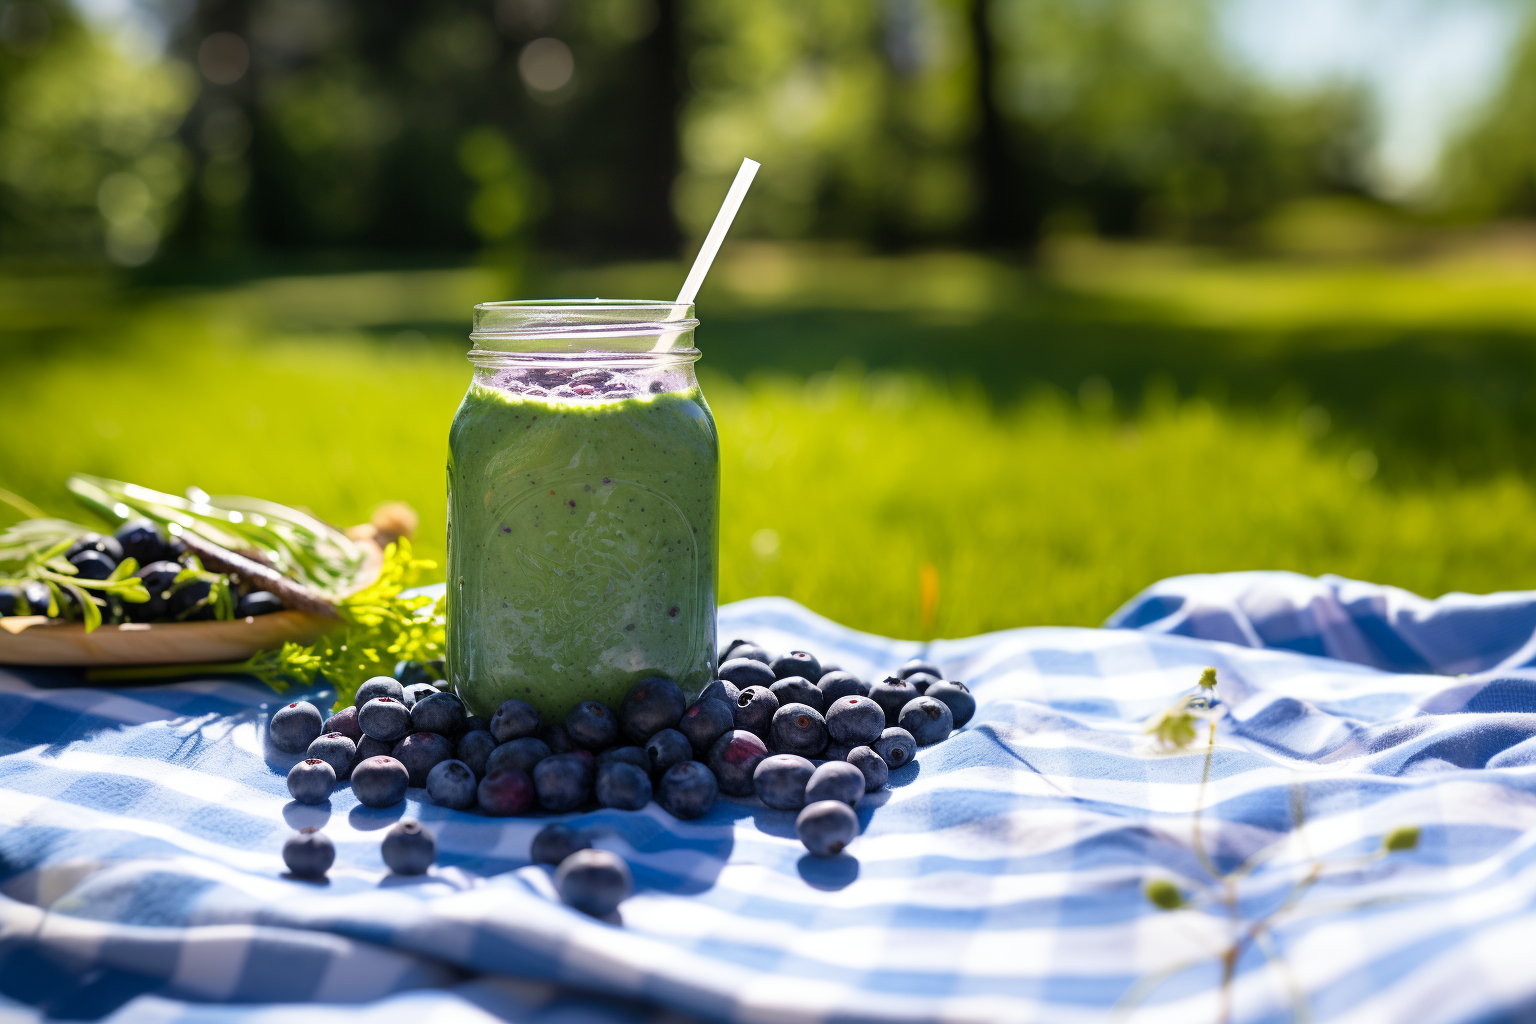 A glass of Rewind blueberry acai blast smoothie bordered by blueberries on a blue and white checkered picnic blanket.